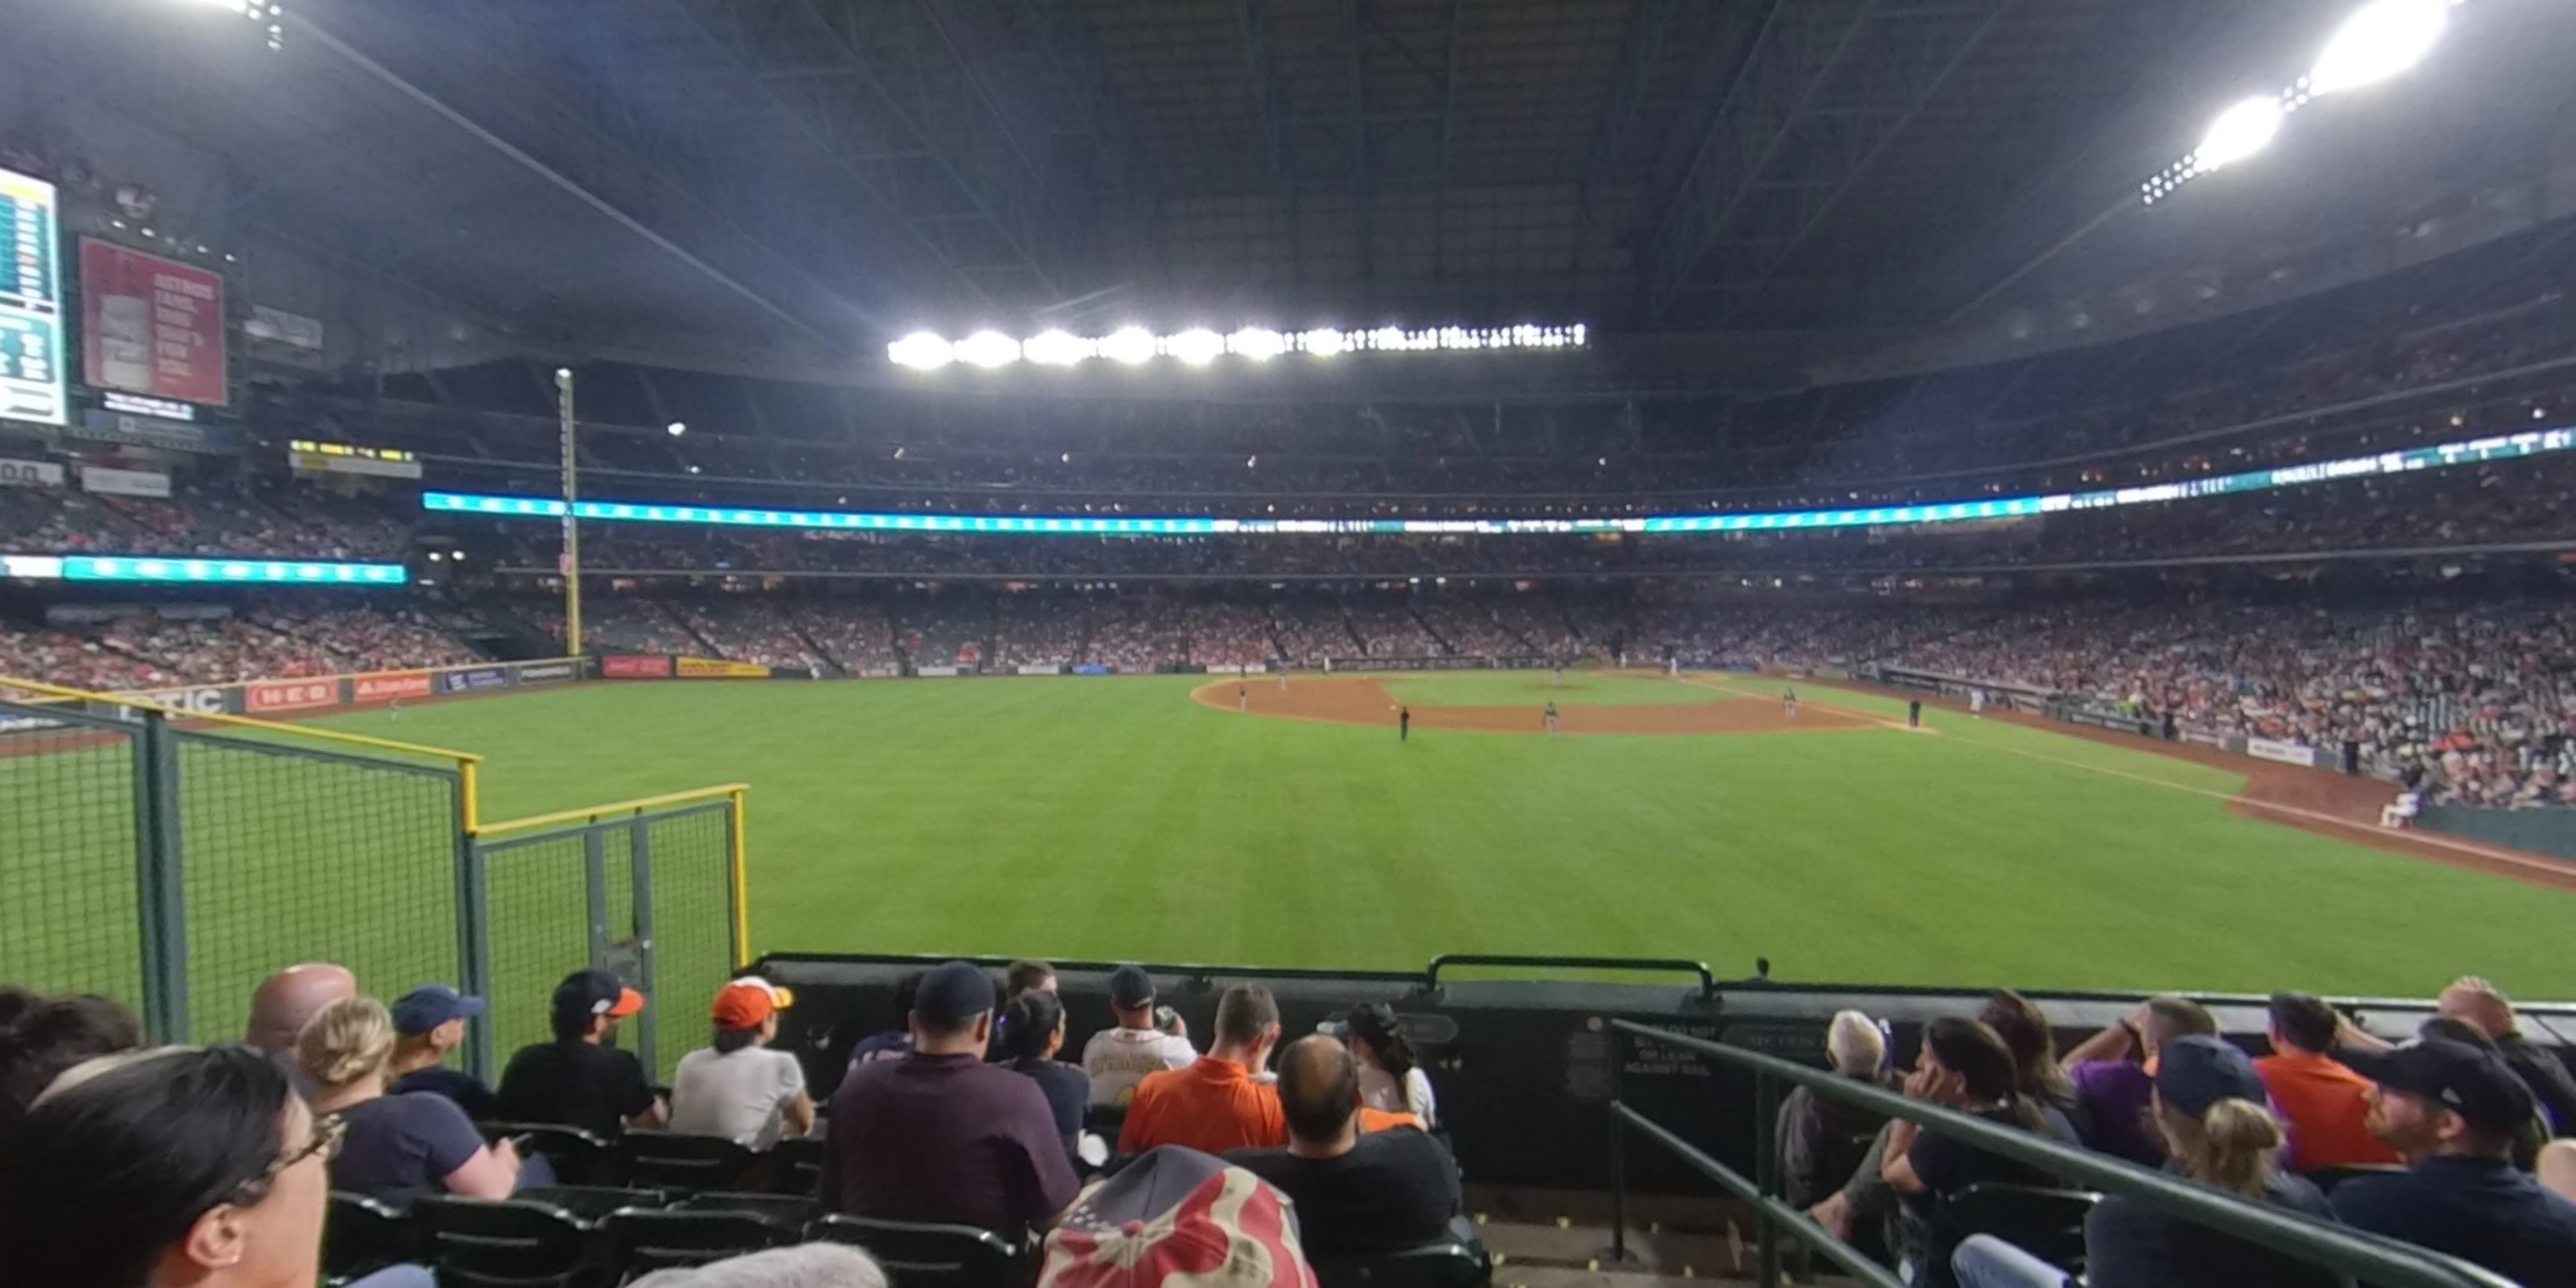 section 100 panoramic seat view  for baseball - minute maid park